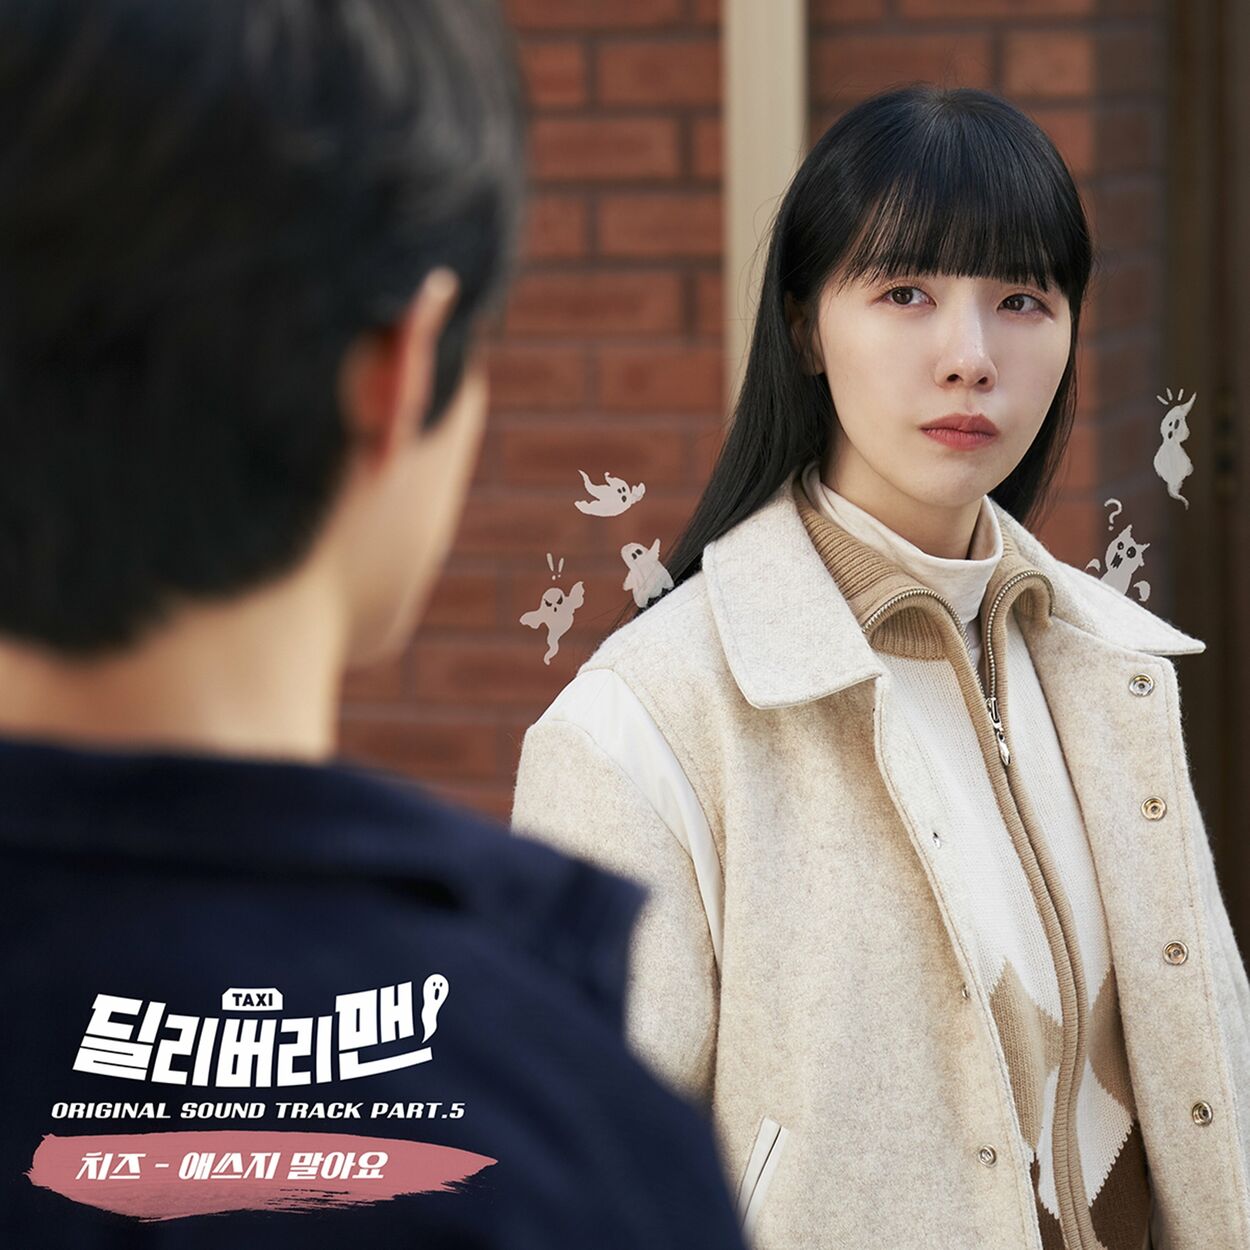 Cheeze – Delivery Man, Pt. 5 OST